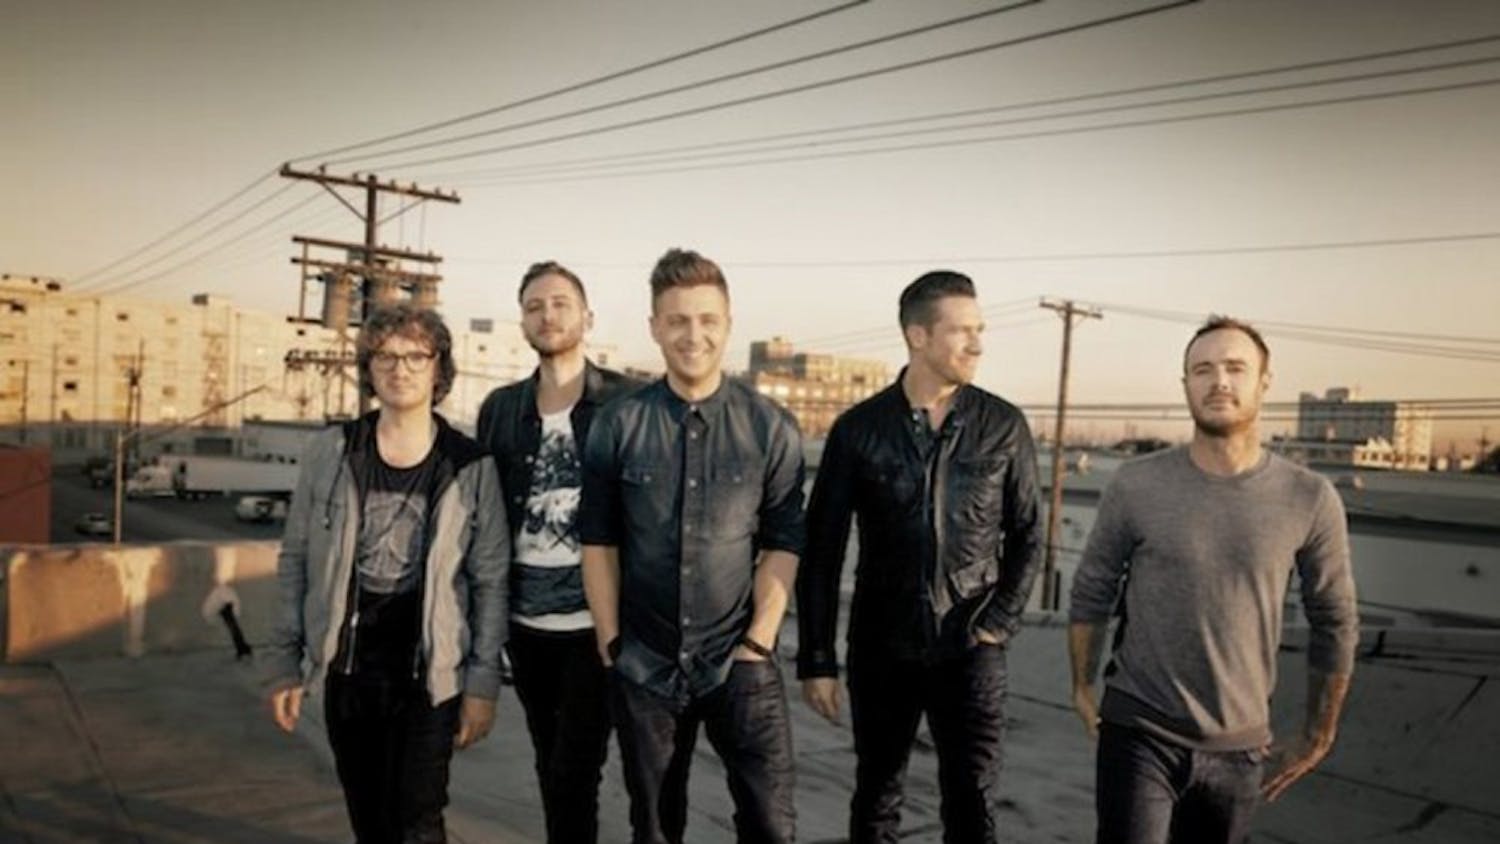 	OneRepublic, known for pop hits like “Apologize,” released their third album “Native” on Tuesday. The record improves and strengthens the band’s existing sound.